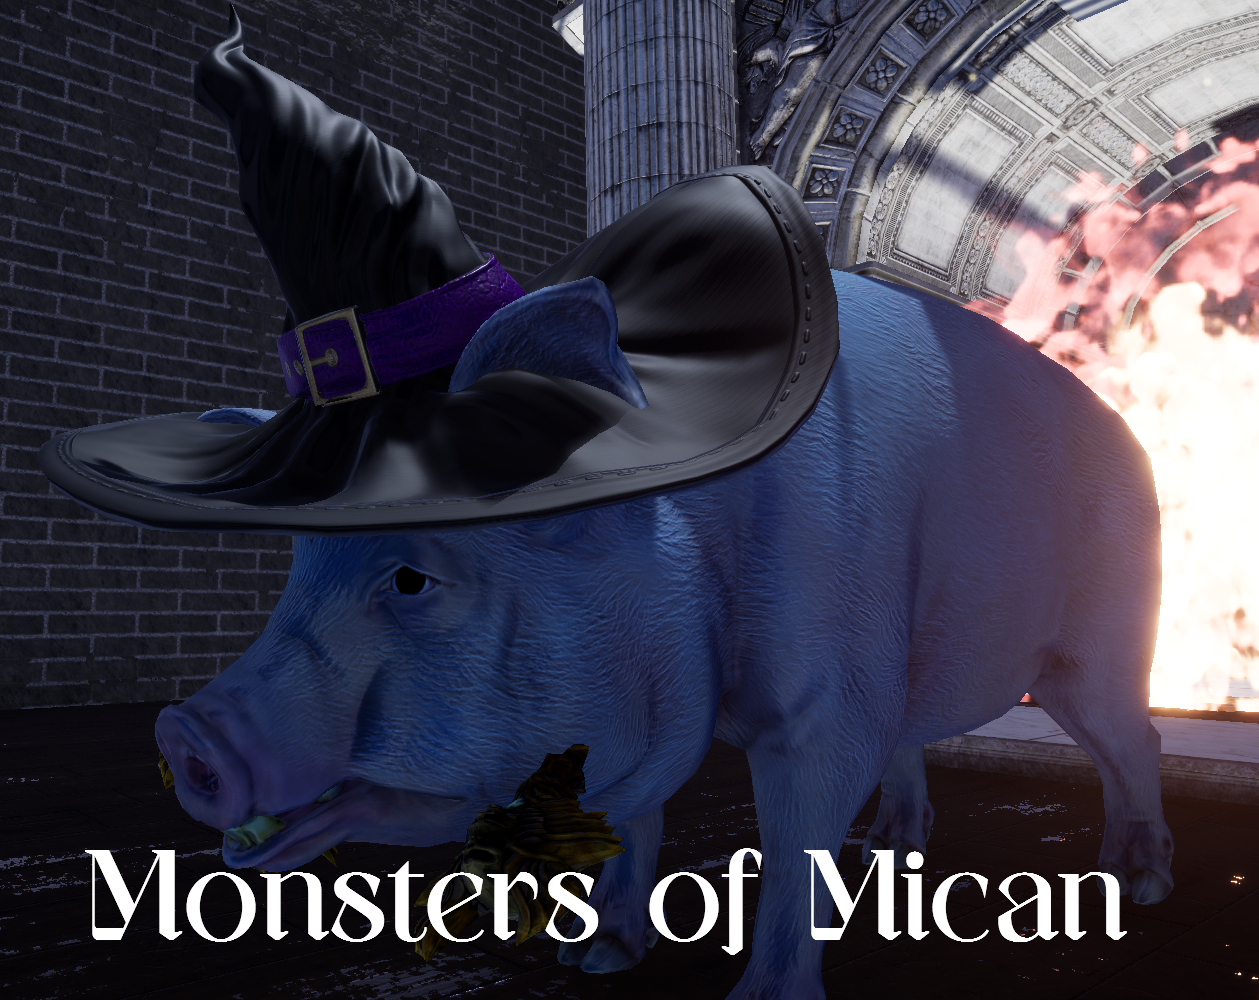 Monsters of Mican download the last version for windows